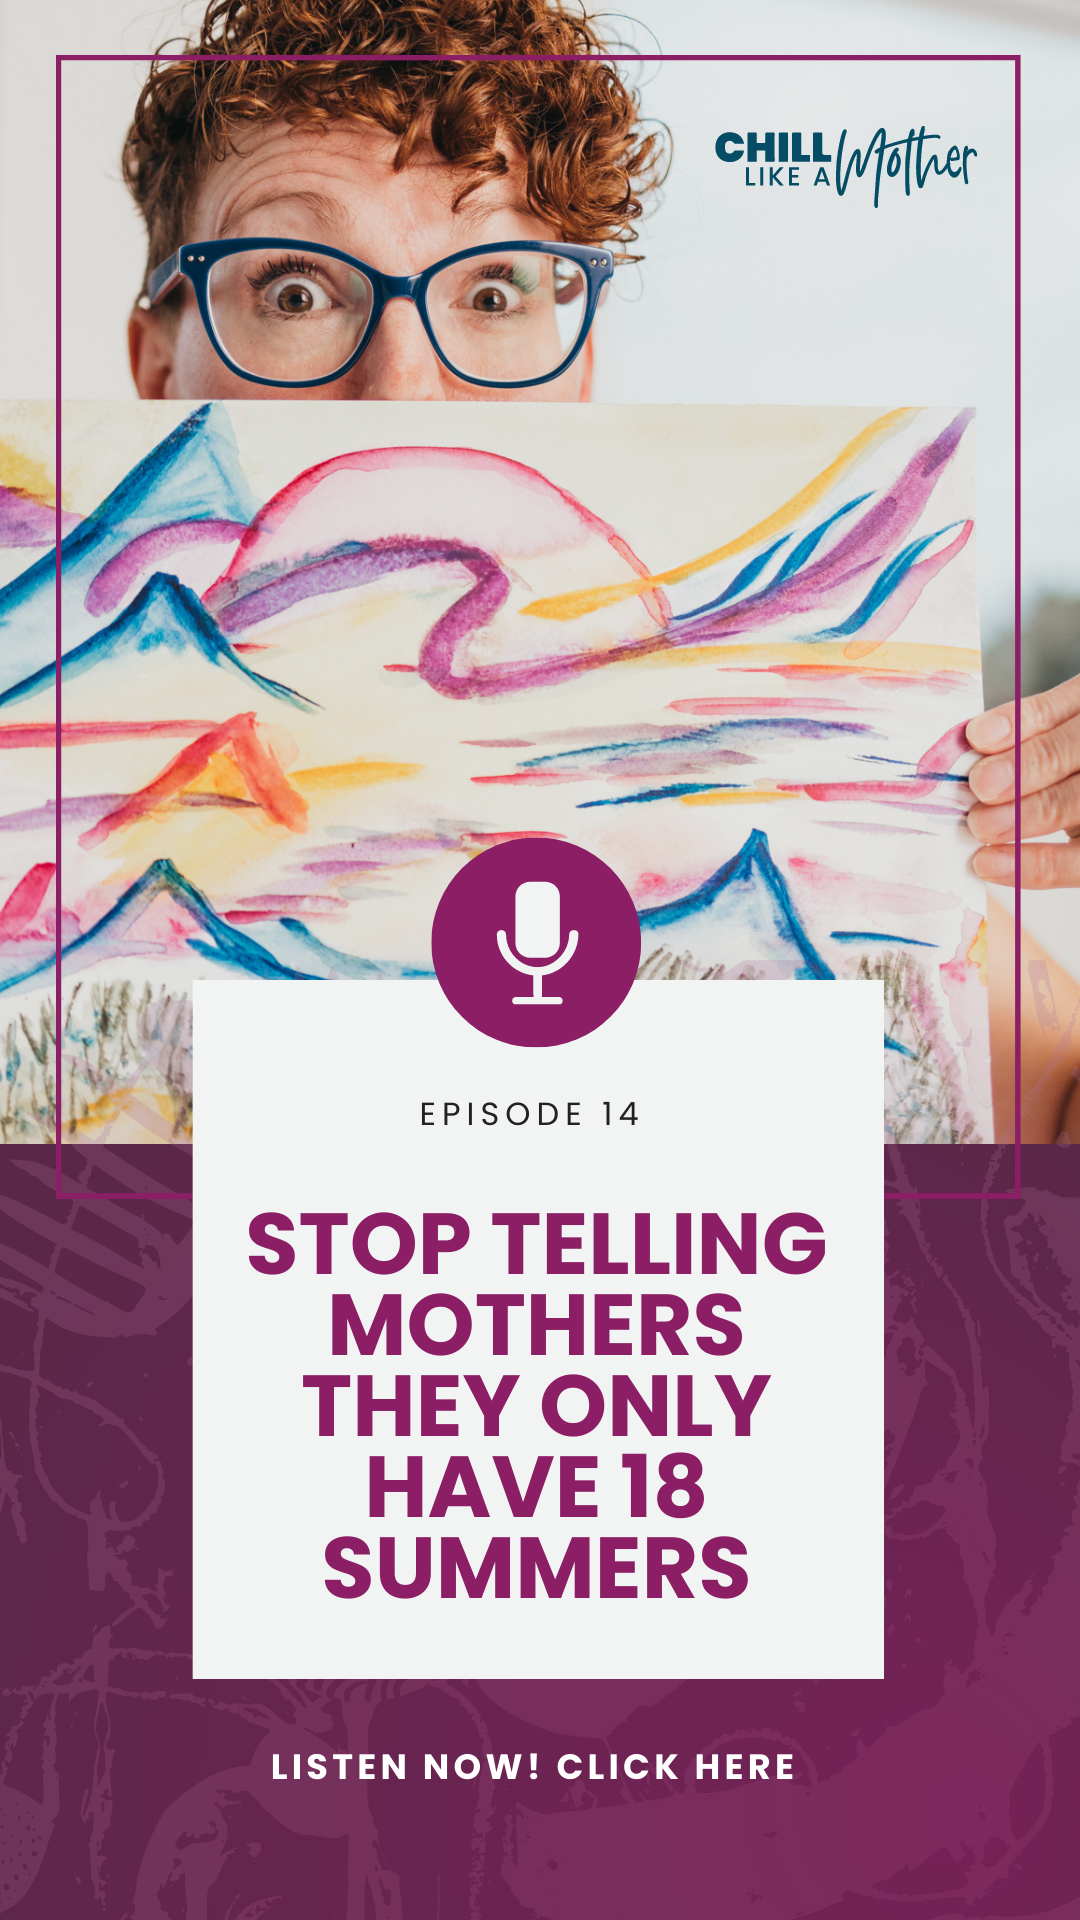  In this episode, we talk about the pressure moms feel when they're told they only have 18 summers with their kids and how it adds to their already overwhelming responsibilities.  